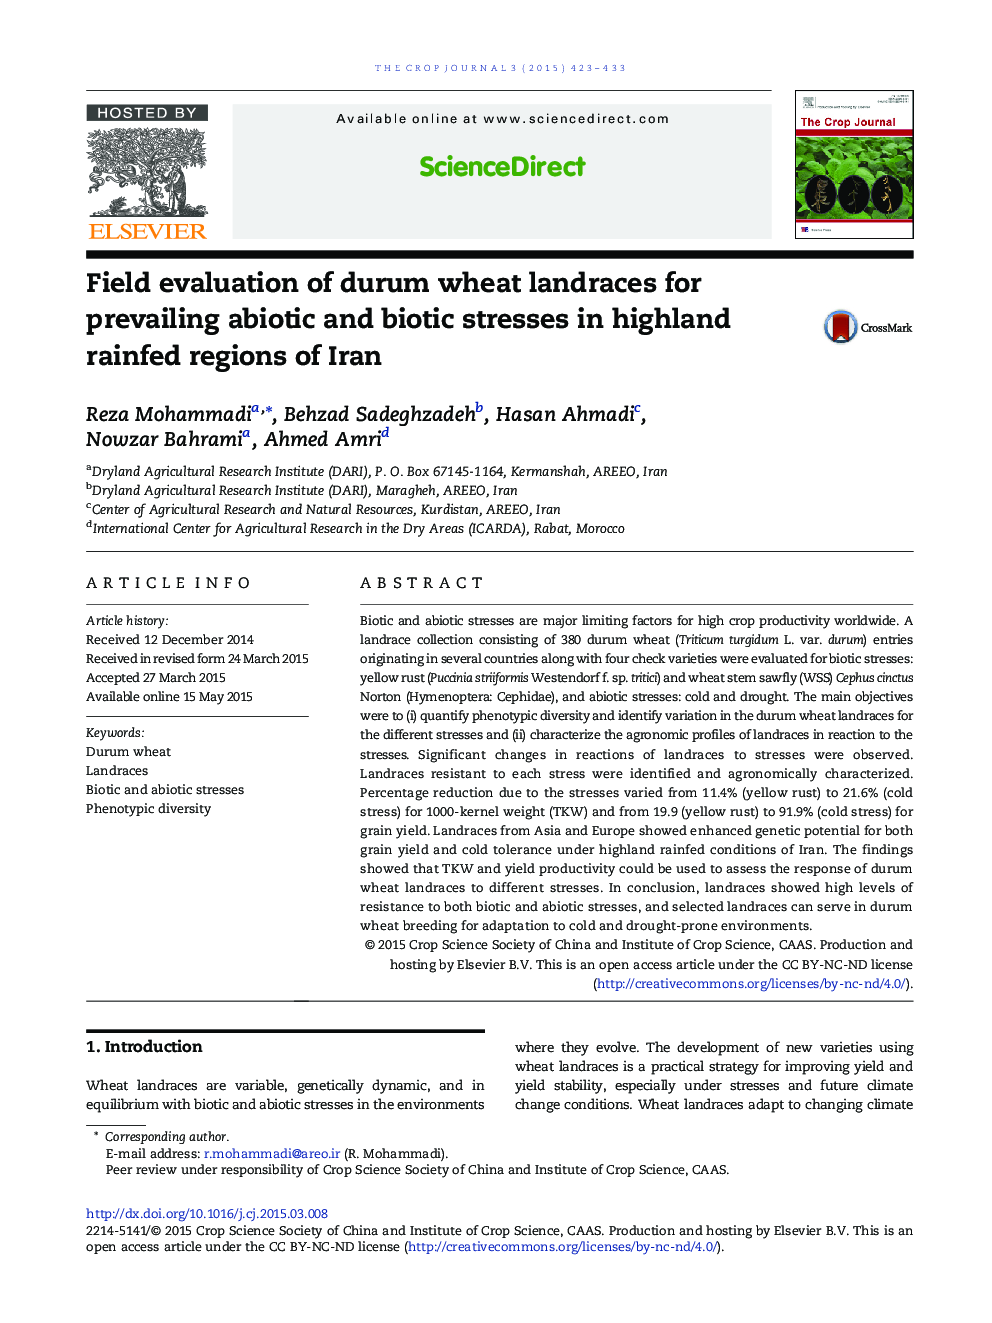 Field evaluation of durum wheat landraces for prevailing abiotic and biotic stresses in highland rainfed regions of Iran 